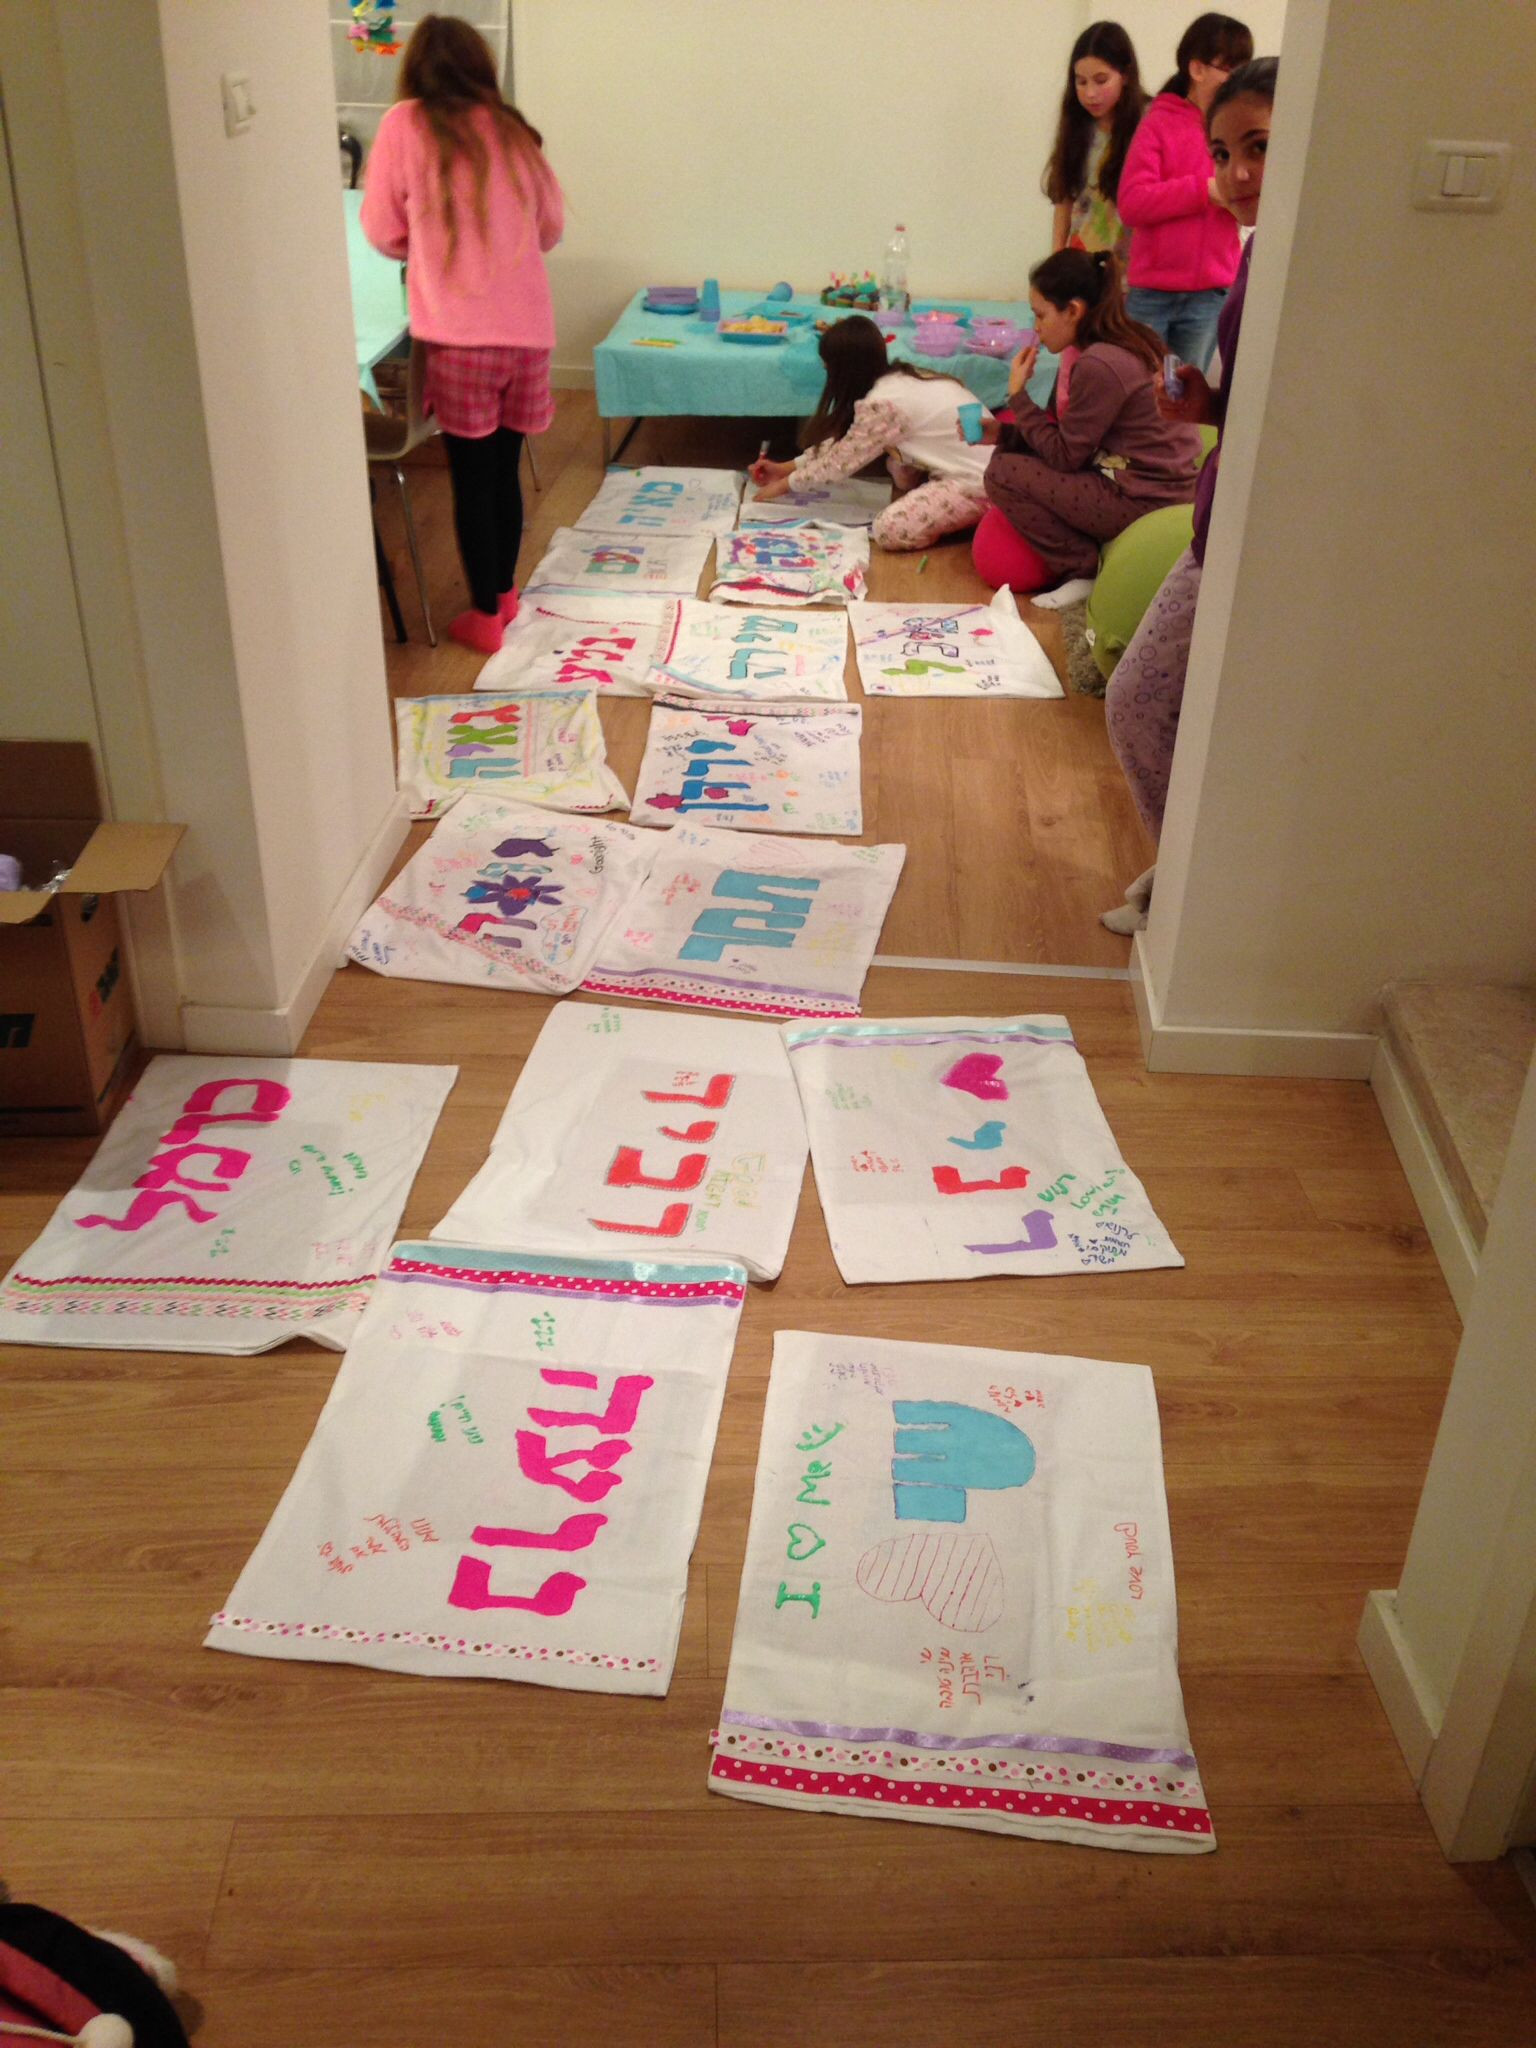 Birthday Party Craft Ideas For 11 Year Olds
 Pillowcase crafts at 11 year old s pyjama party